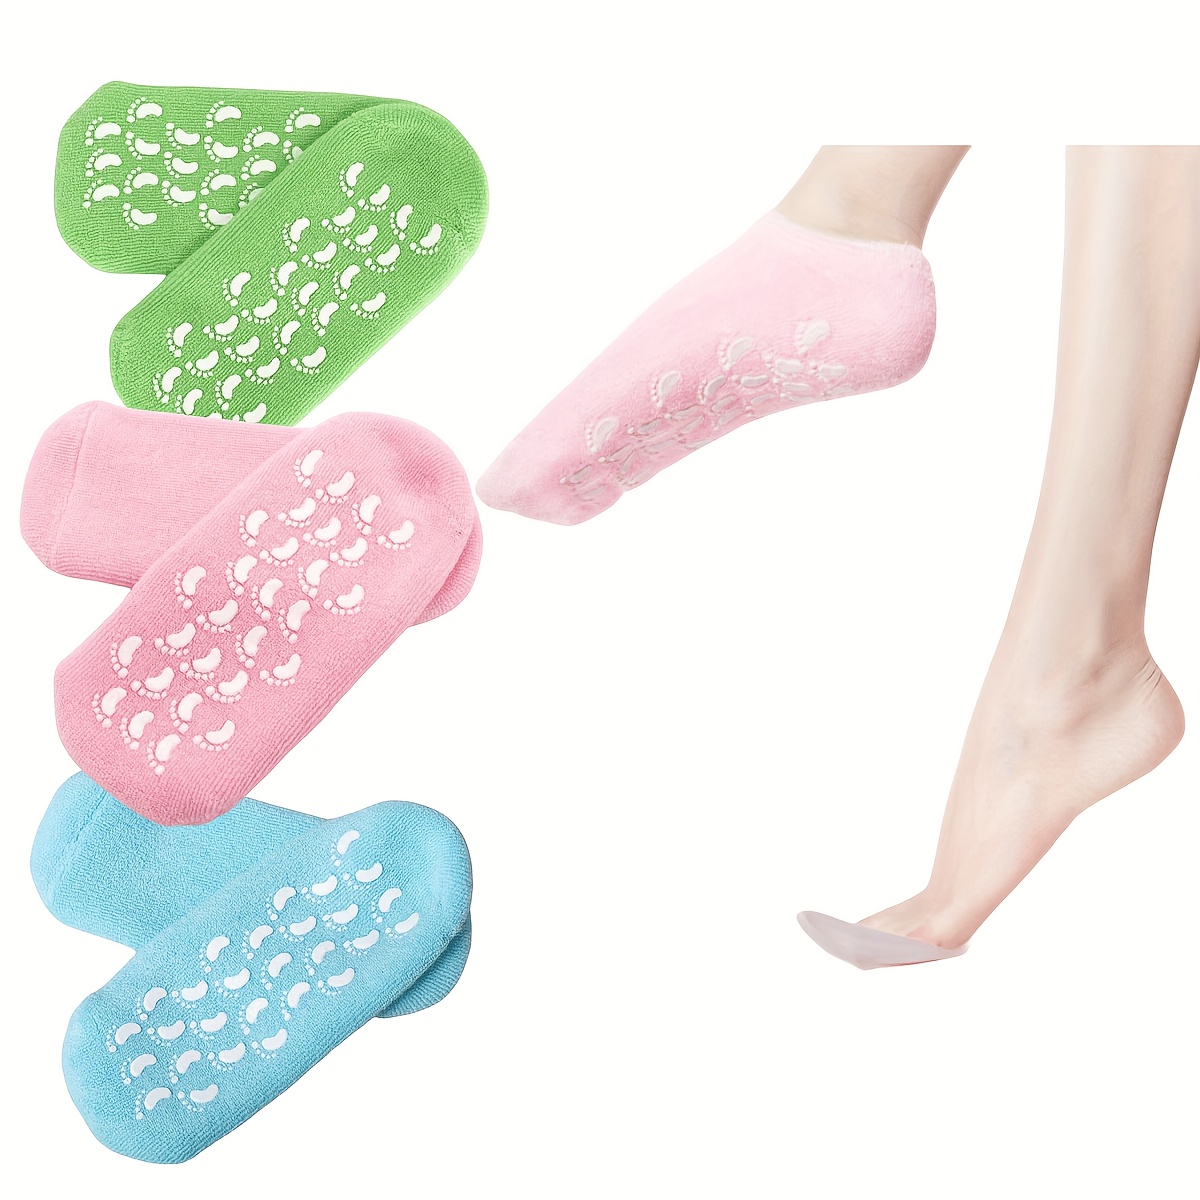 2pcs Moisturizing Socks, Gel Spa Socks For Repairing And Softening Dry  Cracked Feet Skins, Infused With Vitamin And Oil